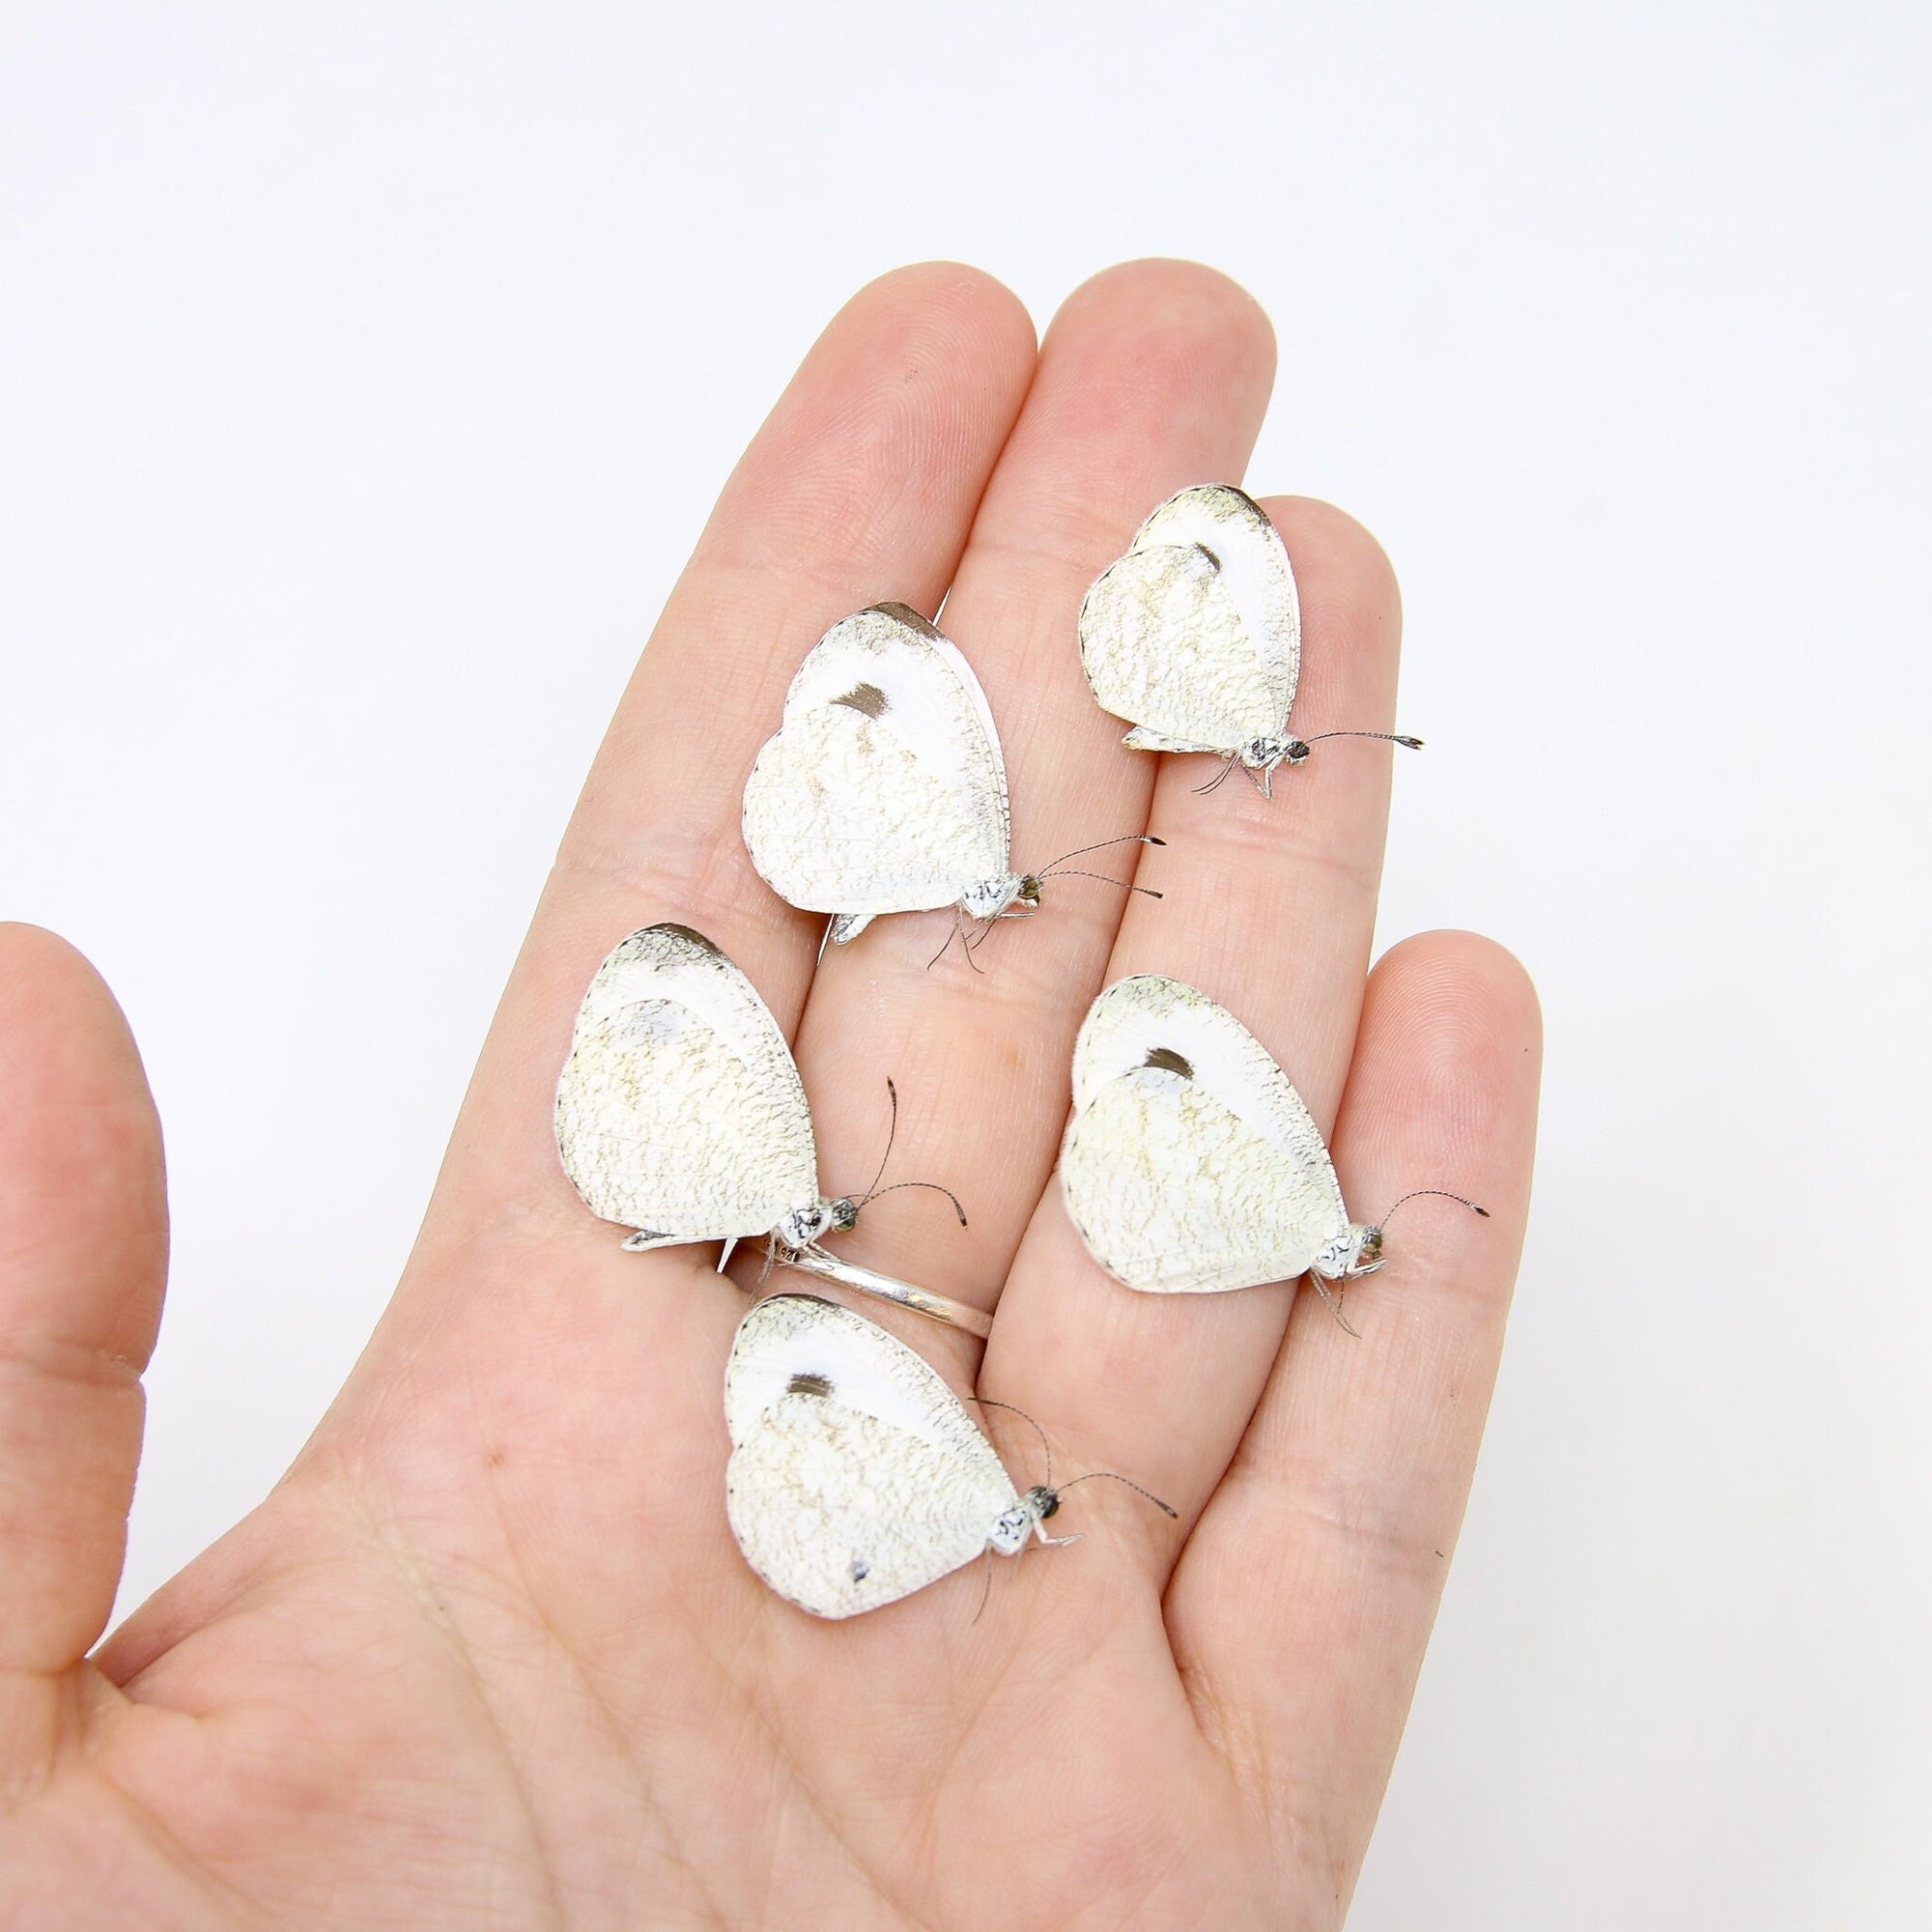 Five (5) Leptosia nina, "Pieridae" A1 Real Dry-Preserved Butterflies, Unmounted Entomology Taxidermy Specimens